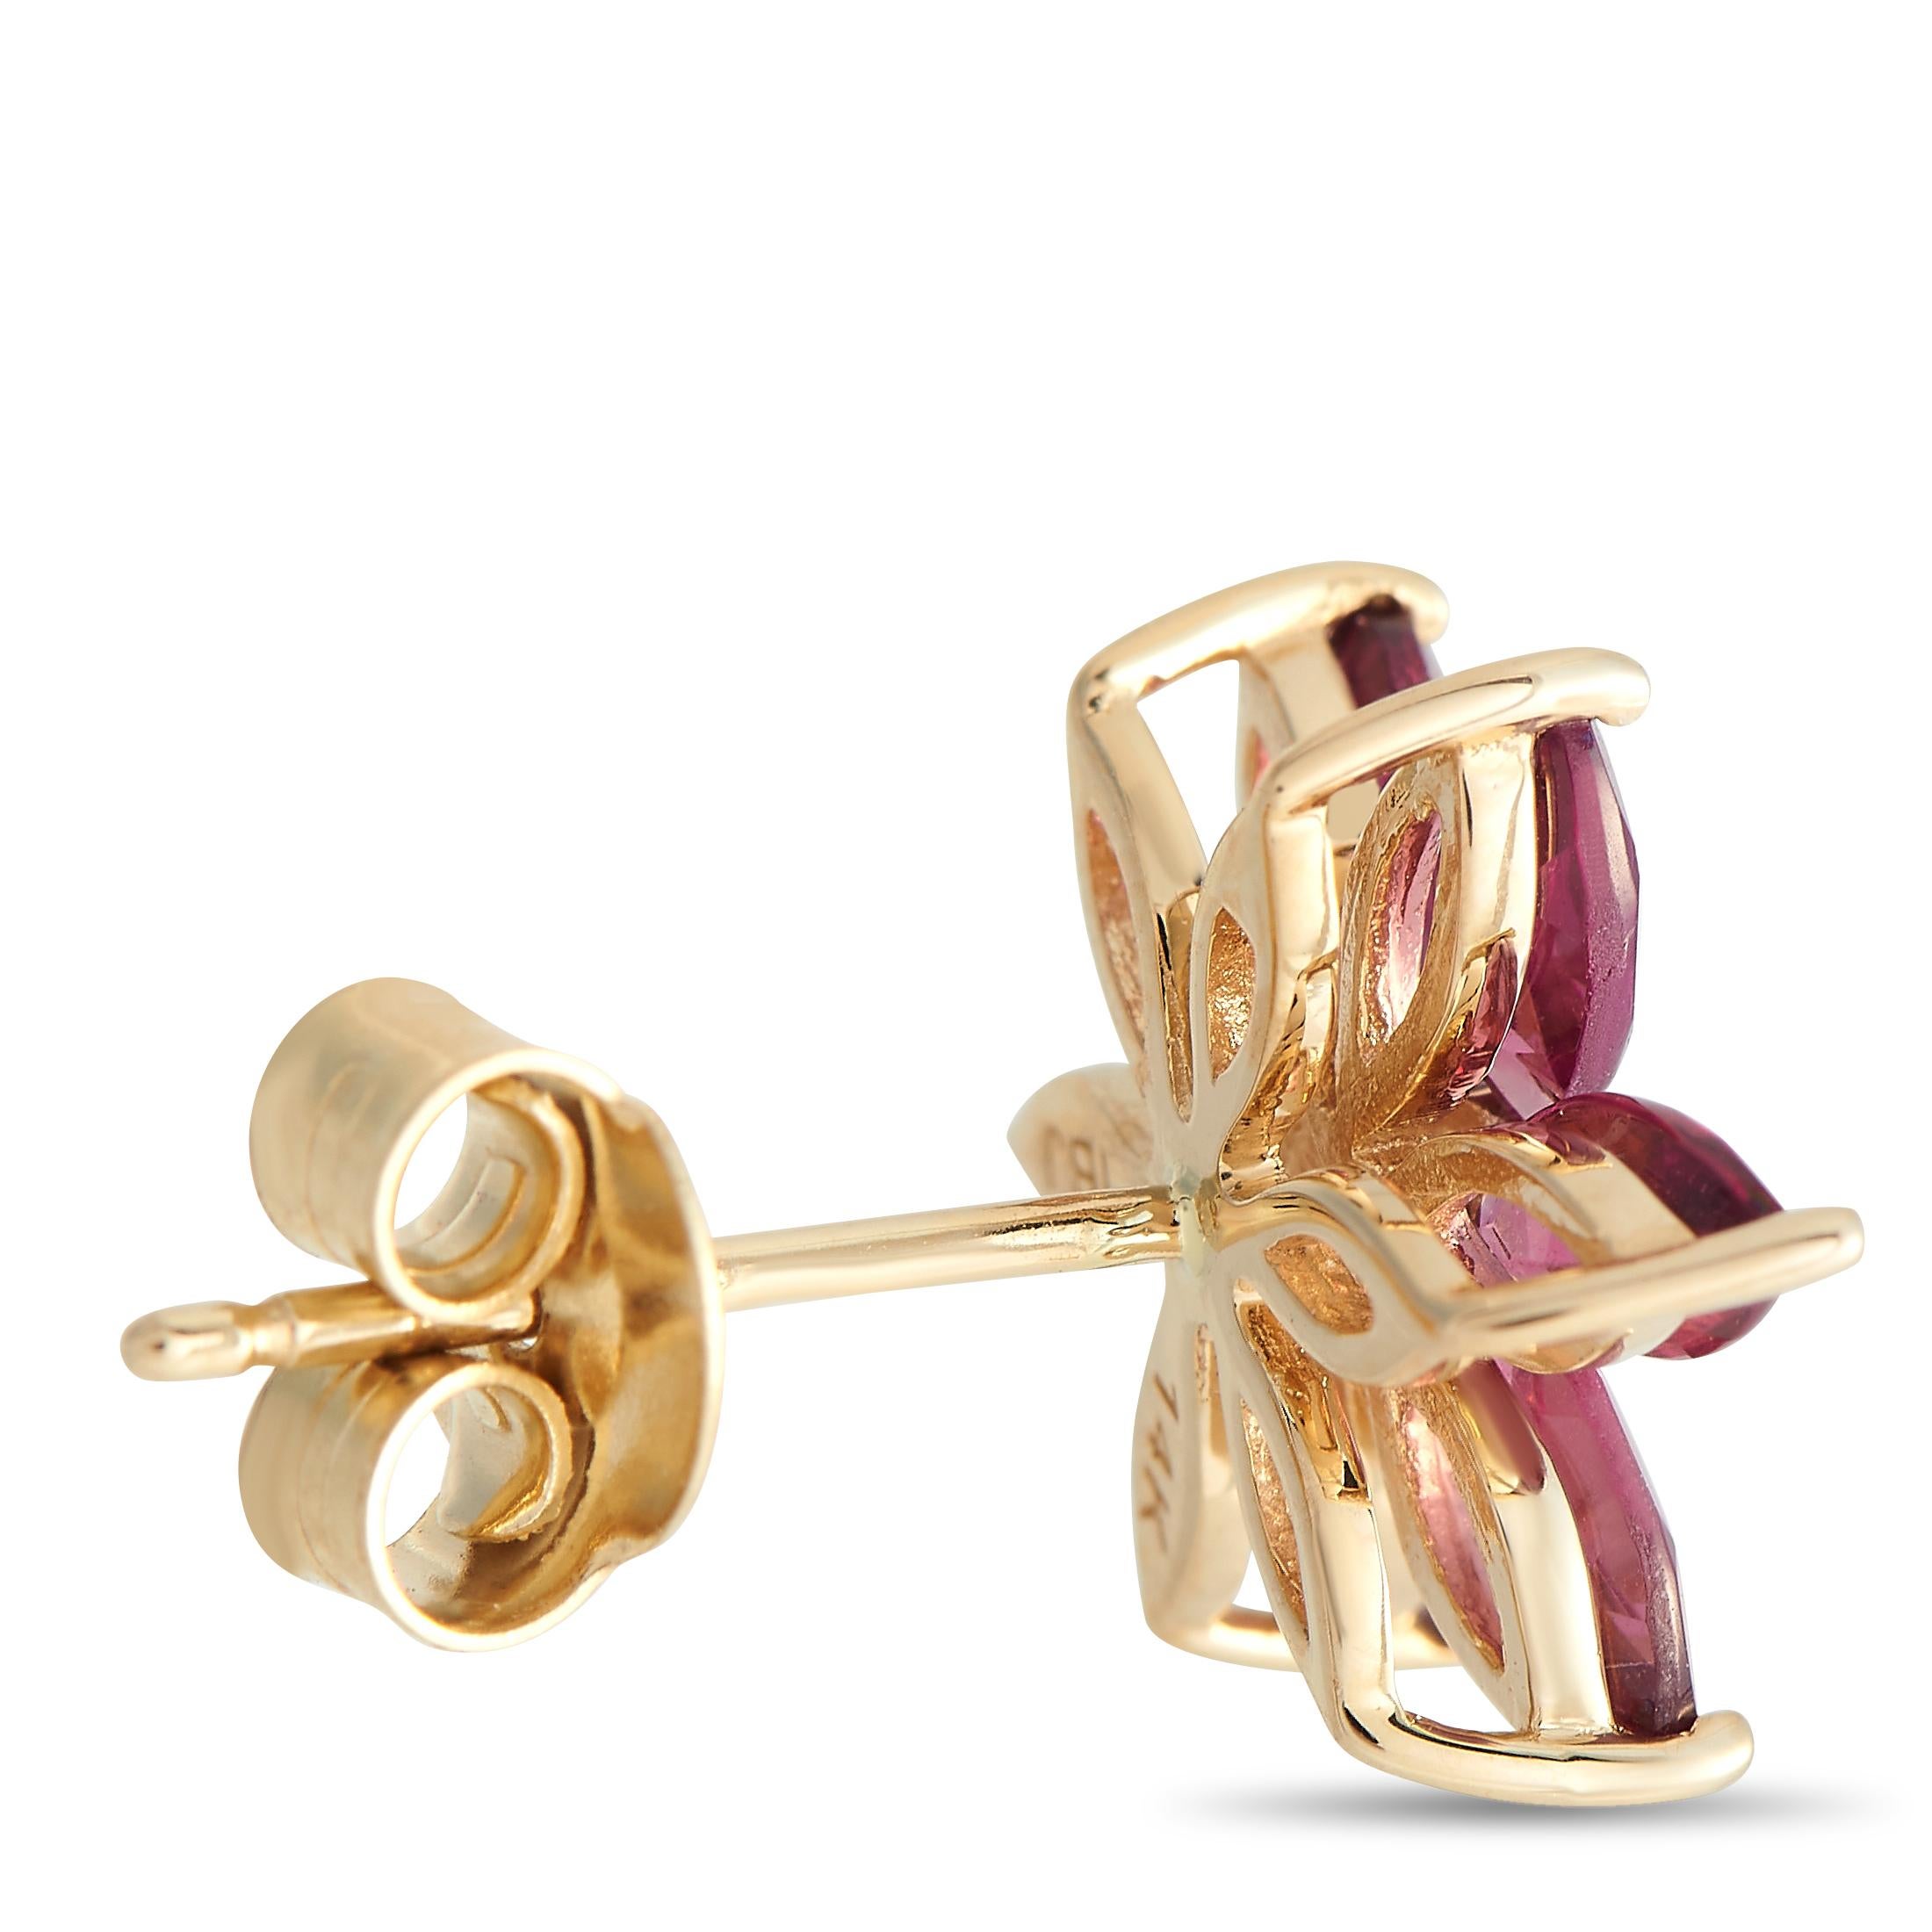 These floral earrings offer an easy way to add a small, feminine touch to your outfits. Each stud has a flower basket setting with six marquise-cut rhodolite petals. A diamond sits at the center, providing a subtle sparkle.Offered brand new, these